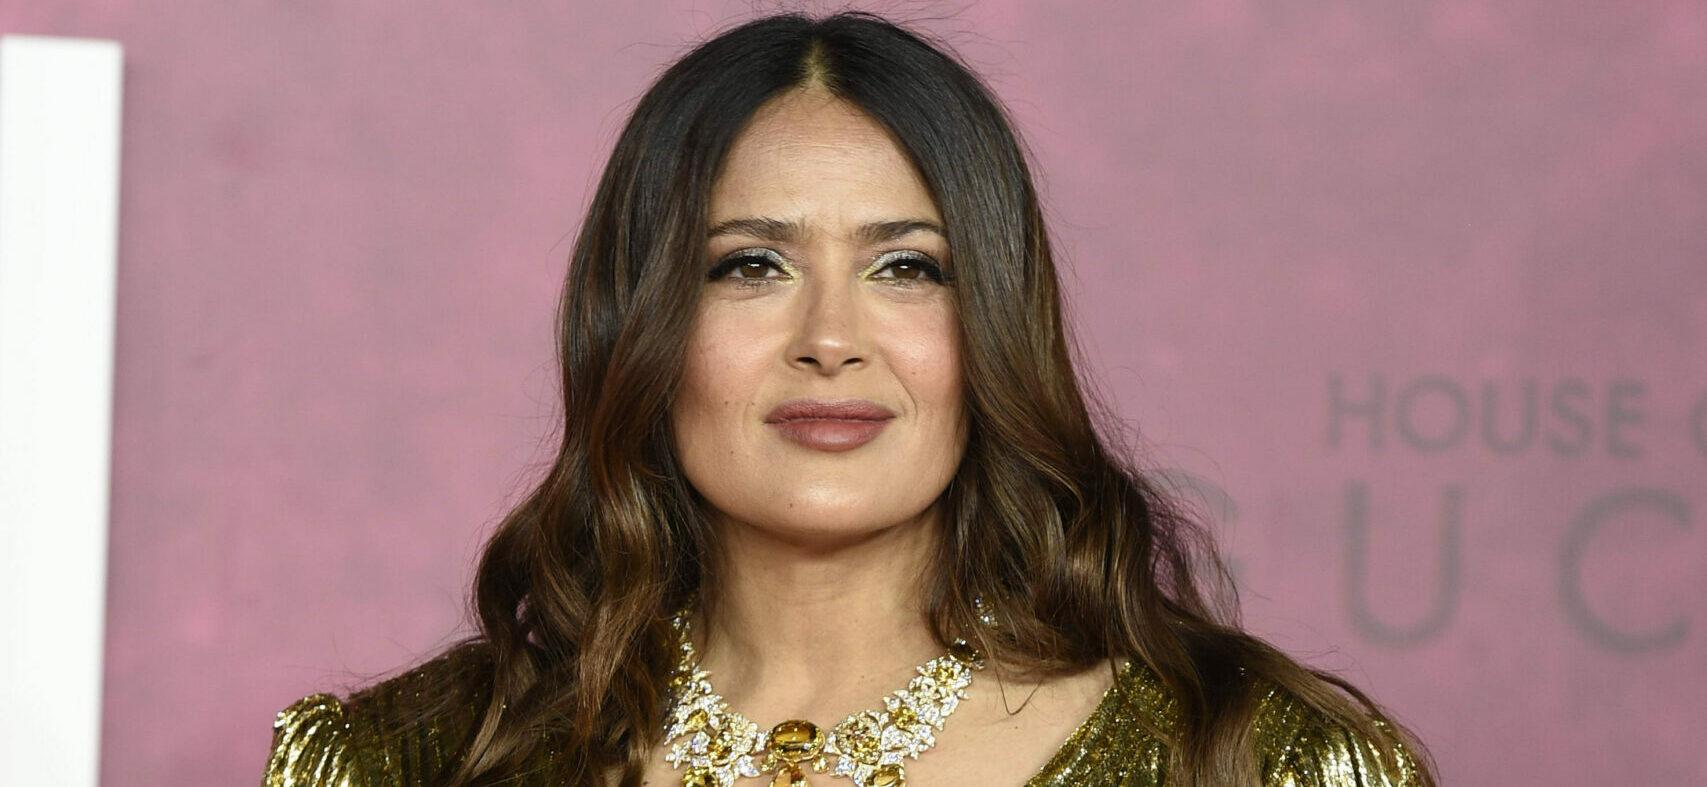 Salma Hayek Looks AGELESS Lounging On A Hammock In Her ‘Safe Place’